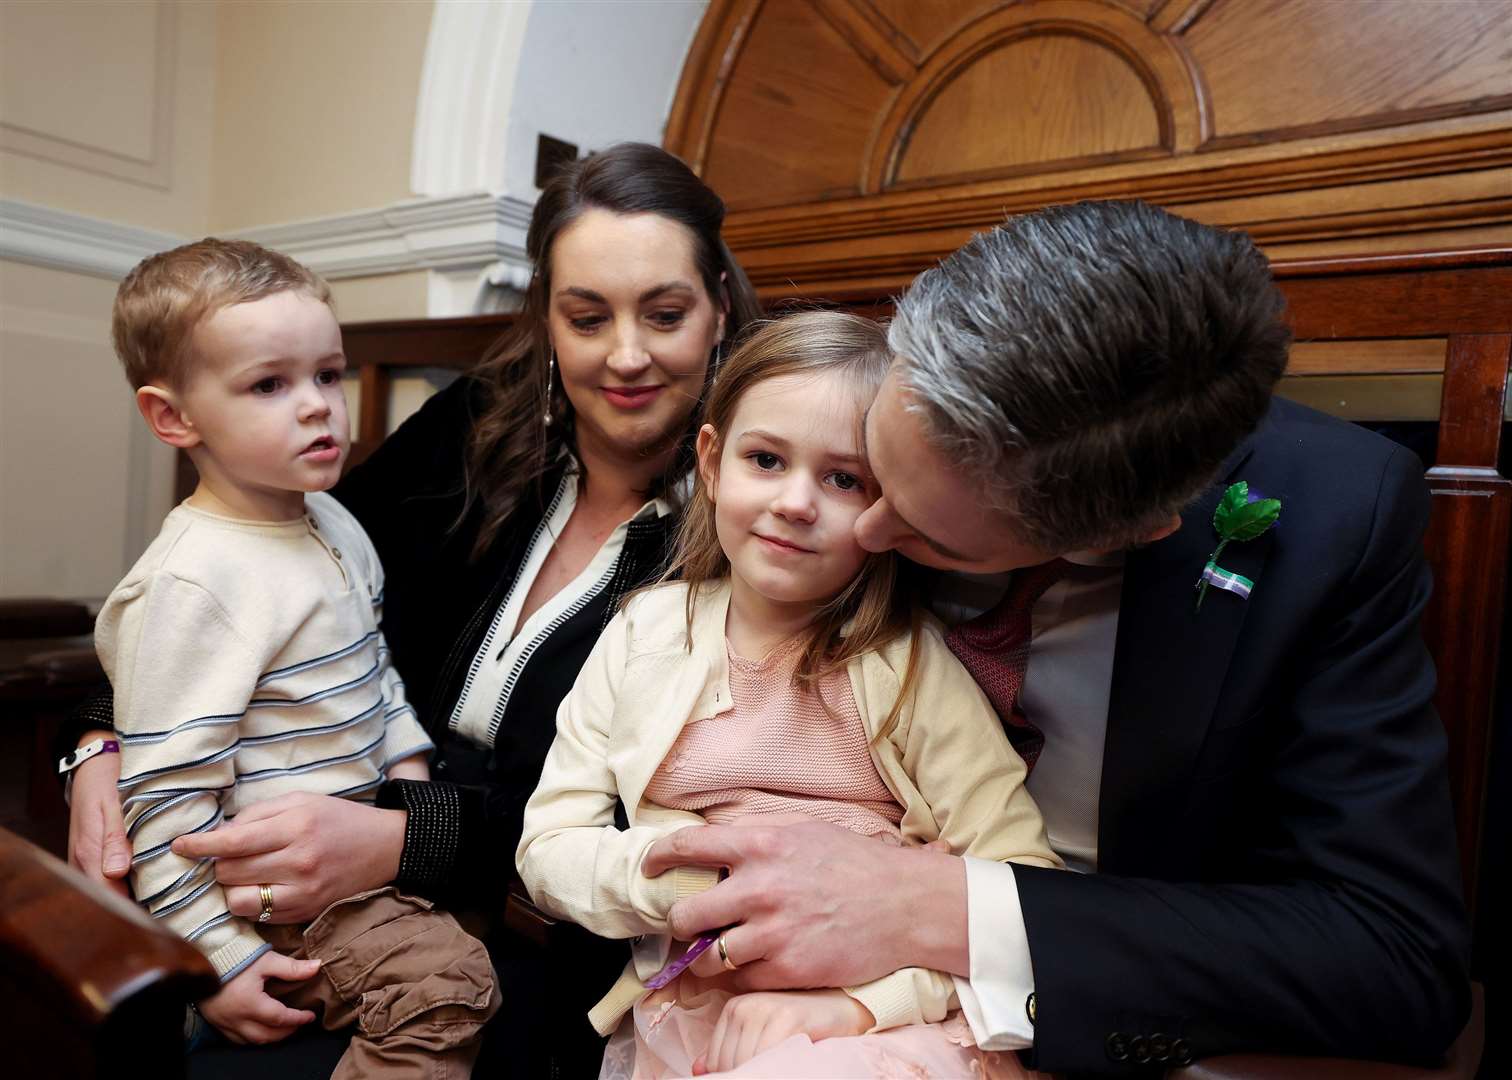 Taoiseach Simon Harris with his wife Caoimhe and children Cillian and Saoirse in the Dail Chamber (Maxwell Photography/PA)